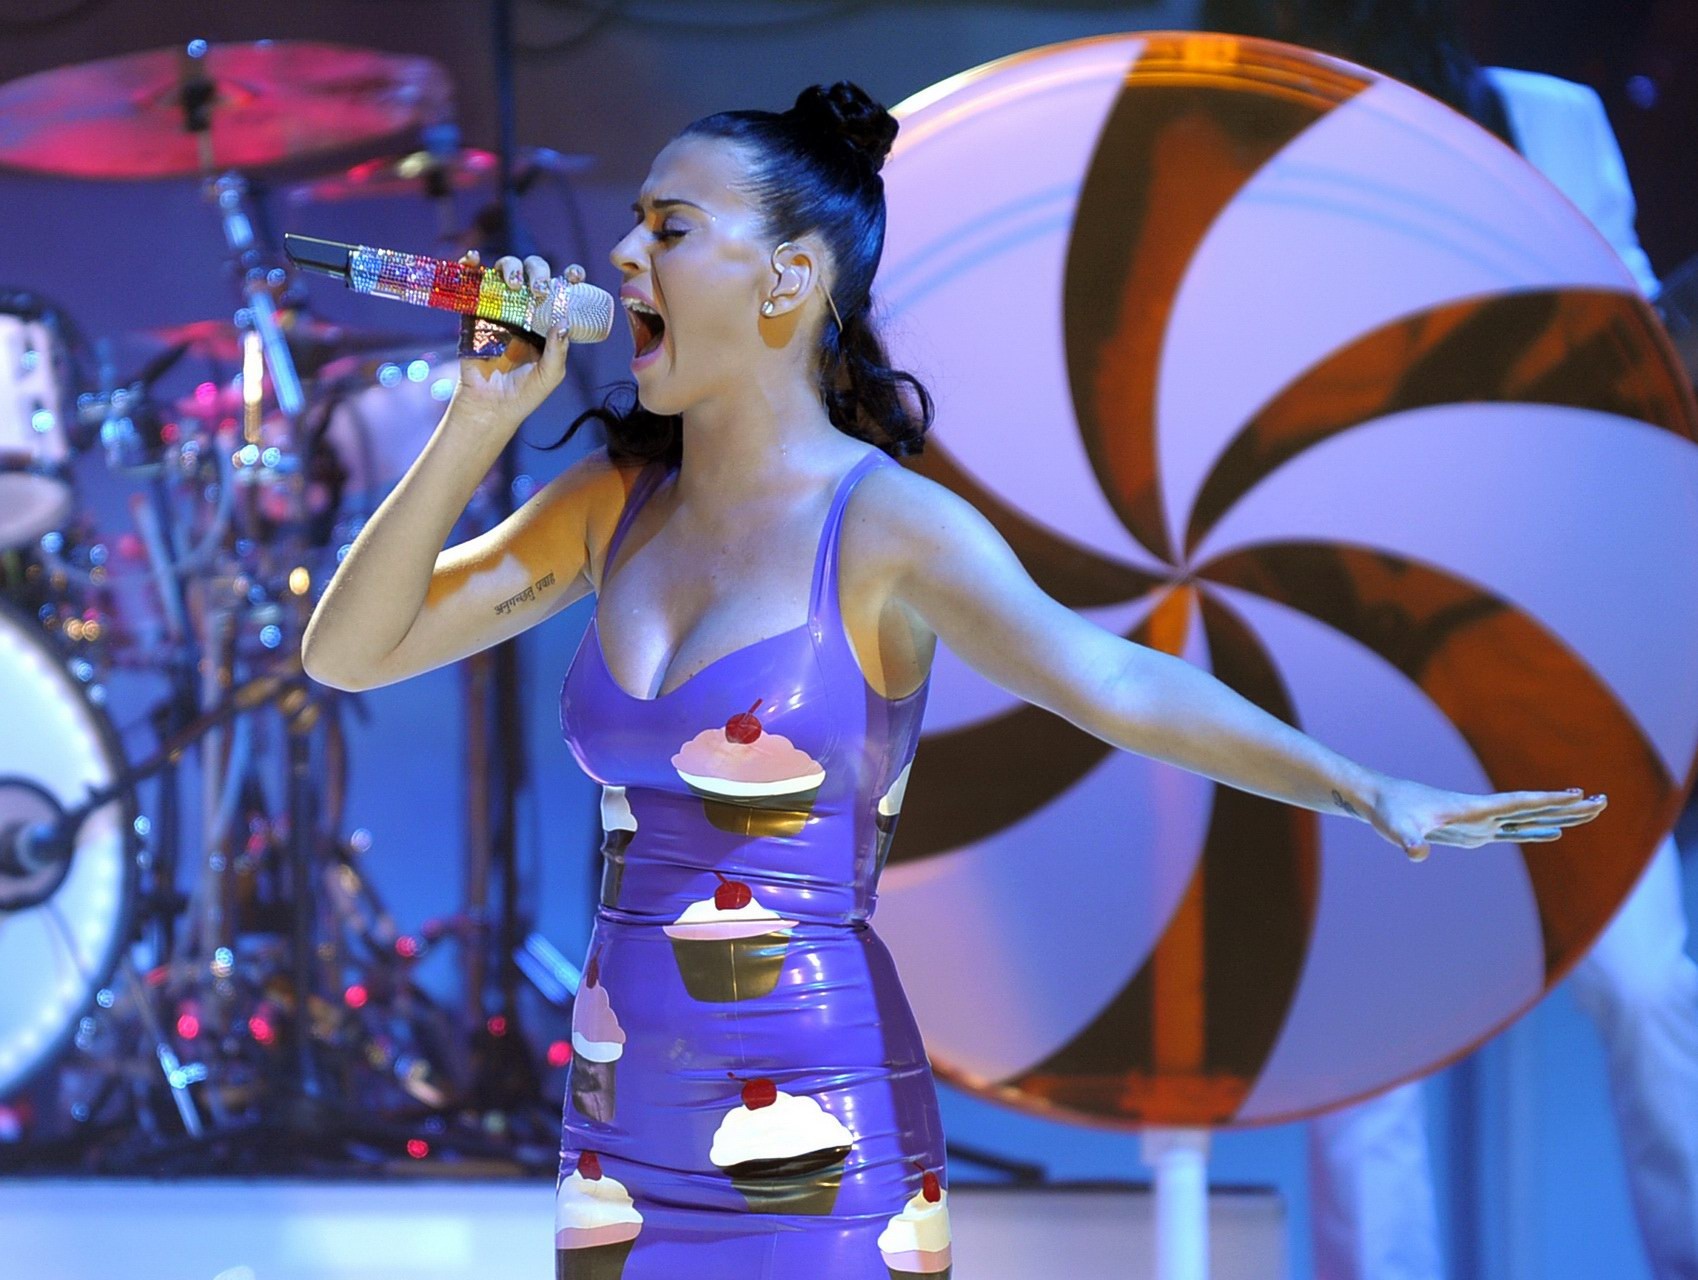 Katy Perry busty in tiny latex dress performing at the Roseland Ballroom in NYC #75327222